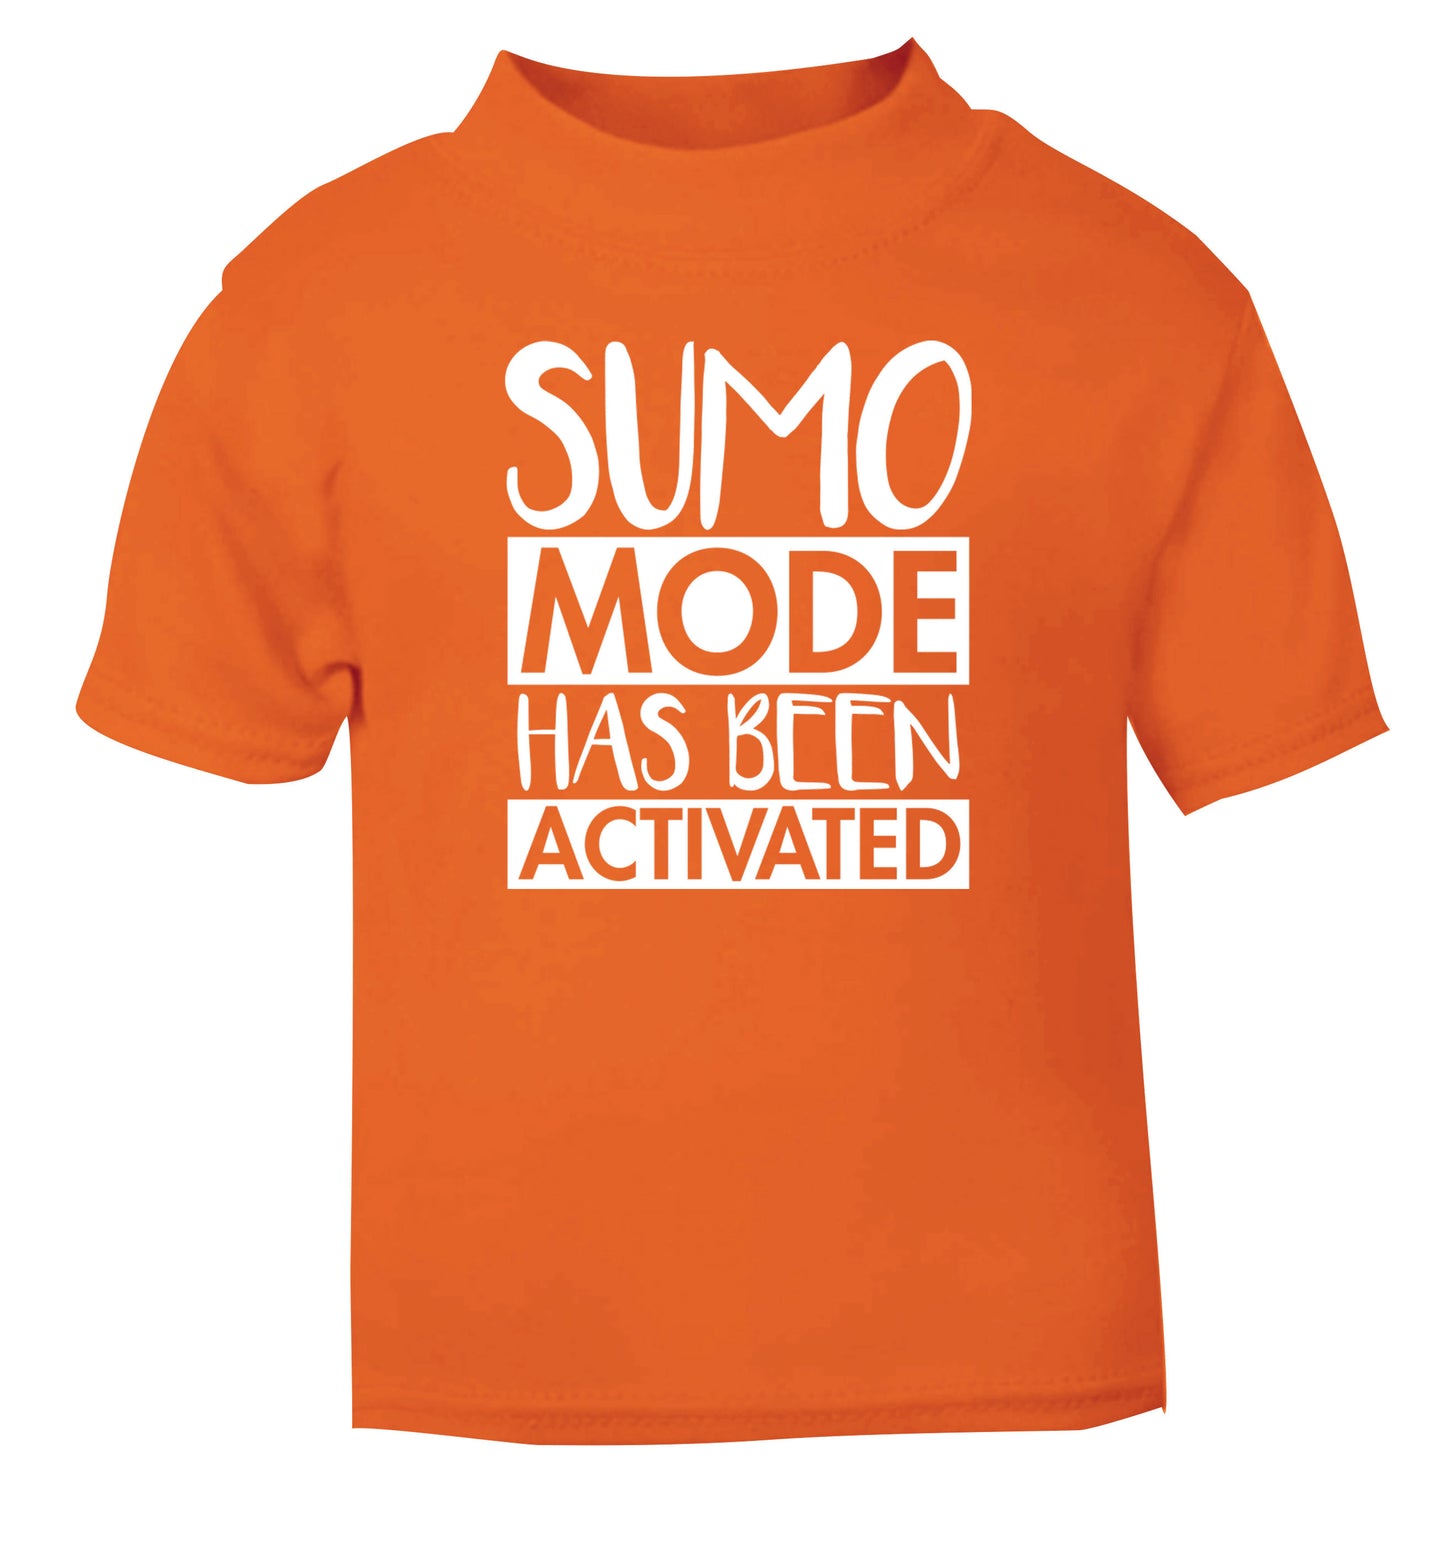 Sumo mode activated orange Baby Toddler Tshirt 2 Years